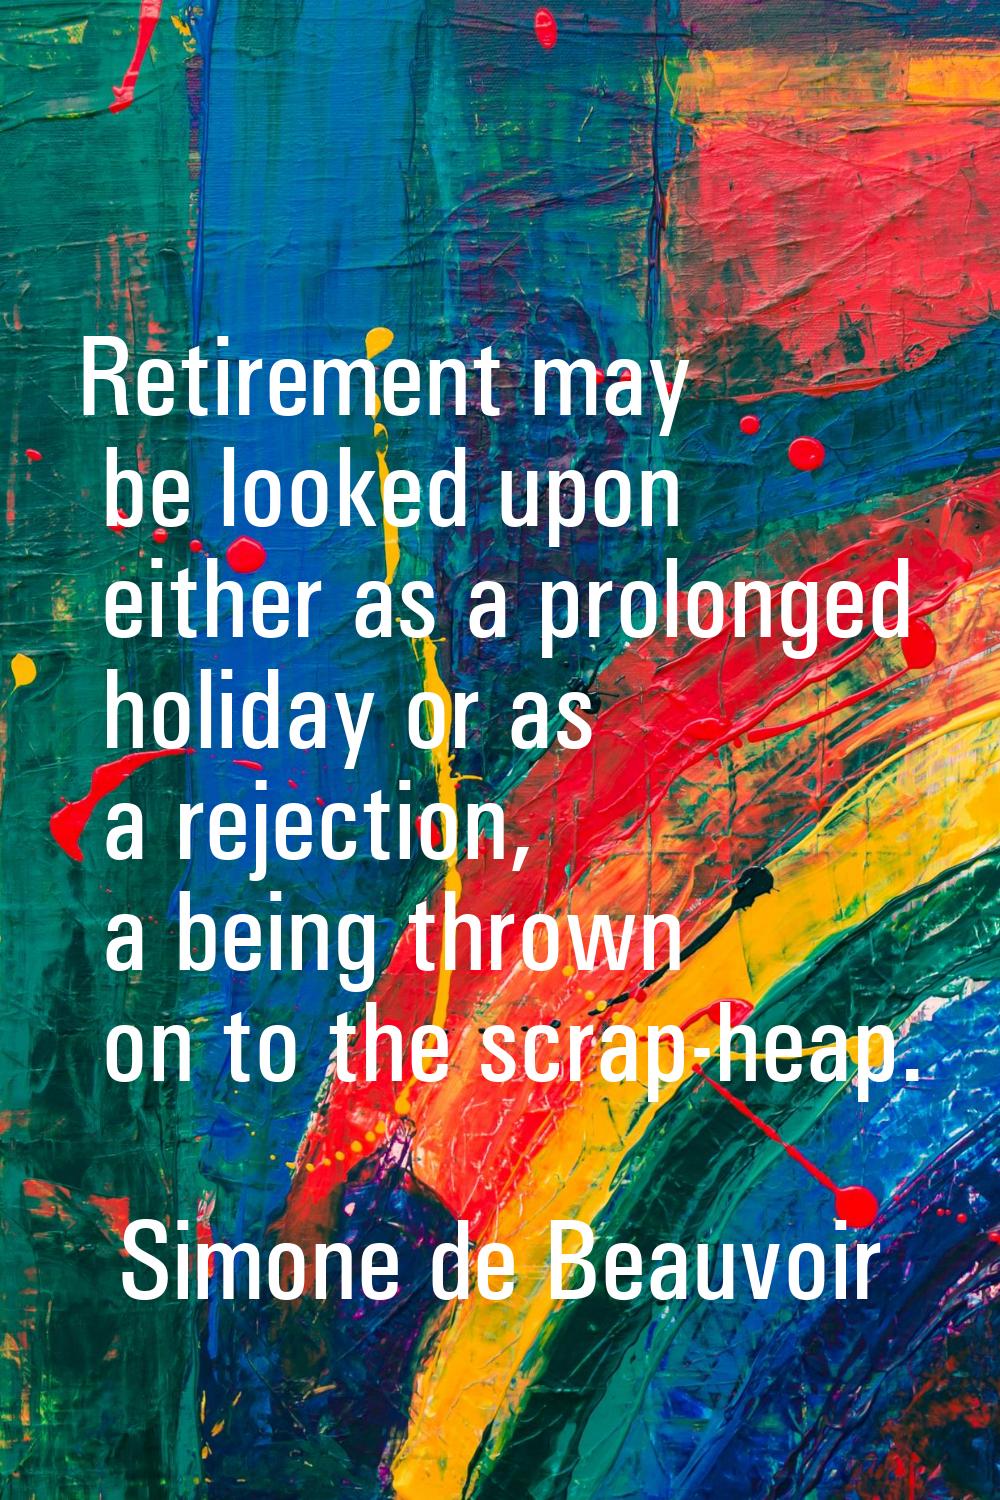 Retirement may be looked upon either as a prolonged holiday or as a rejection, a being thrown on to